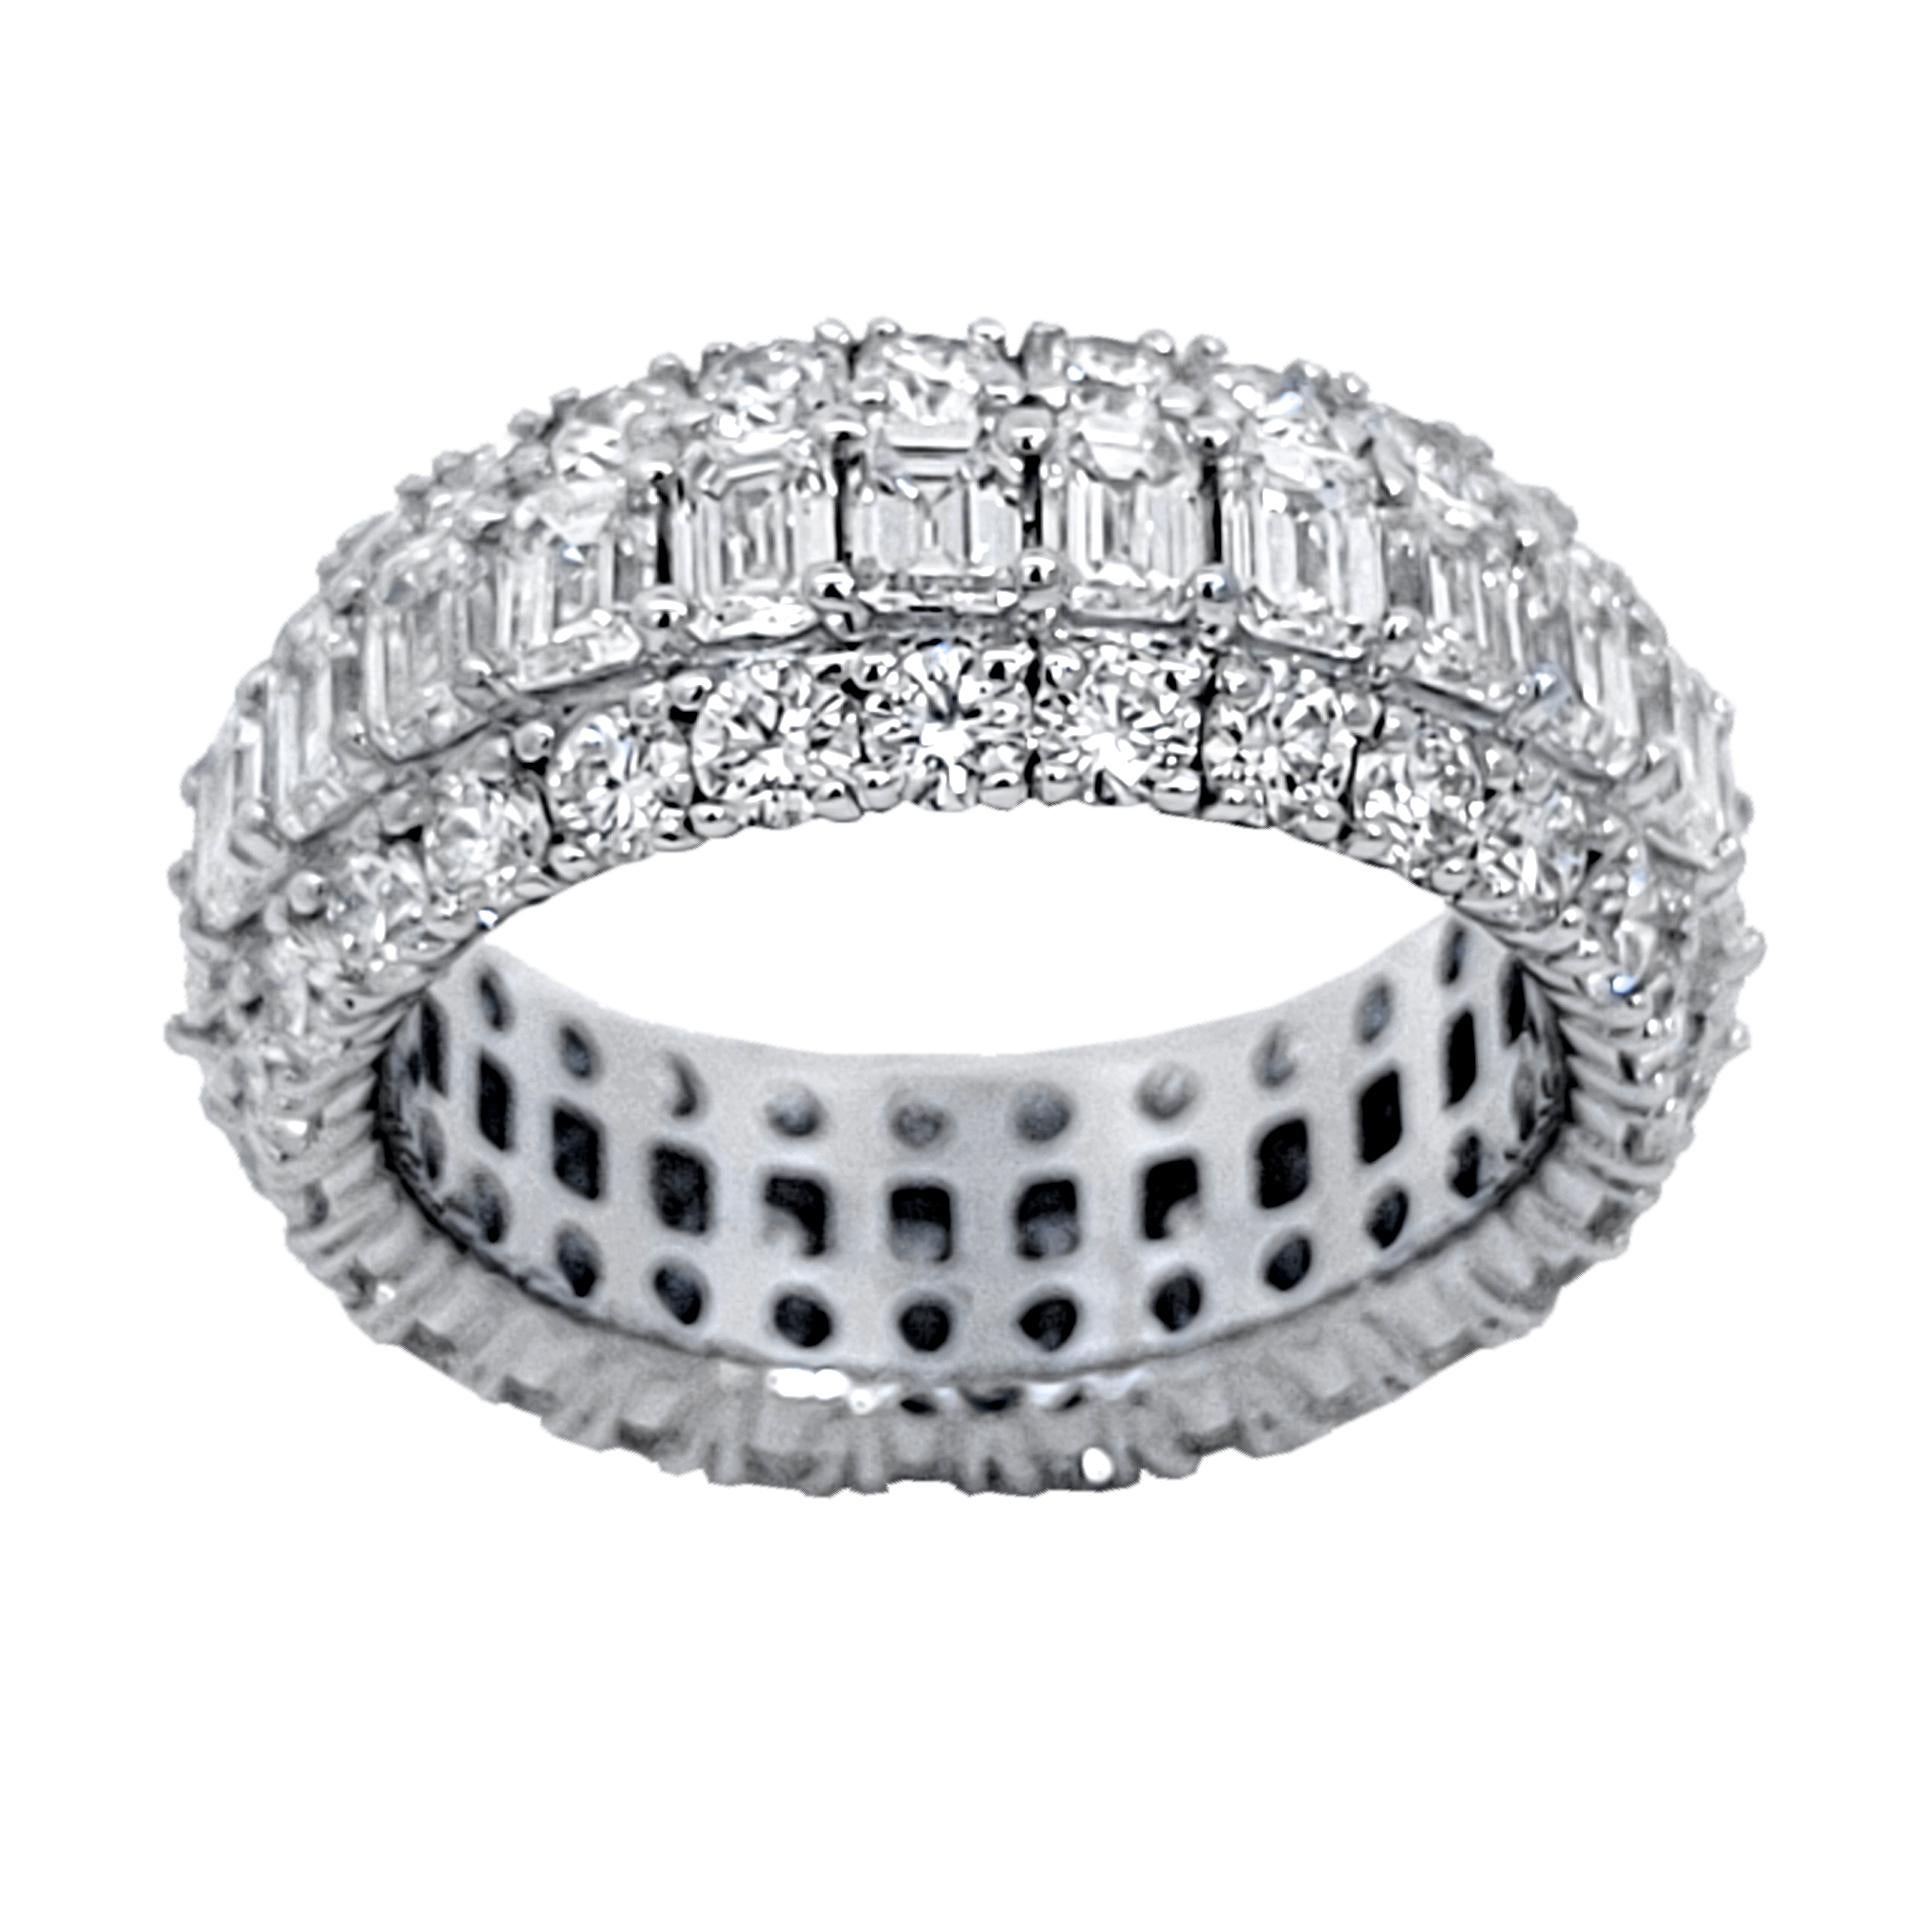 Experience timeless sophistication with this stunning Diamond Eternity Band. Perfectly crafted to symbolize everlasting love, its full circle of shimmering diamonds exudes luxury and elegance, making it the quintessential wedding or anniversary